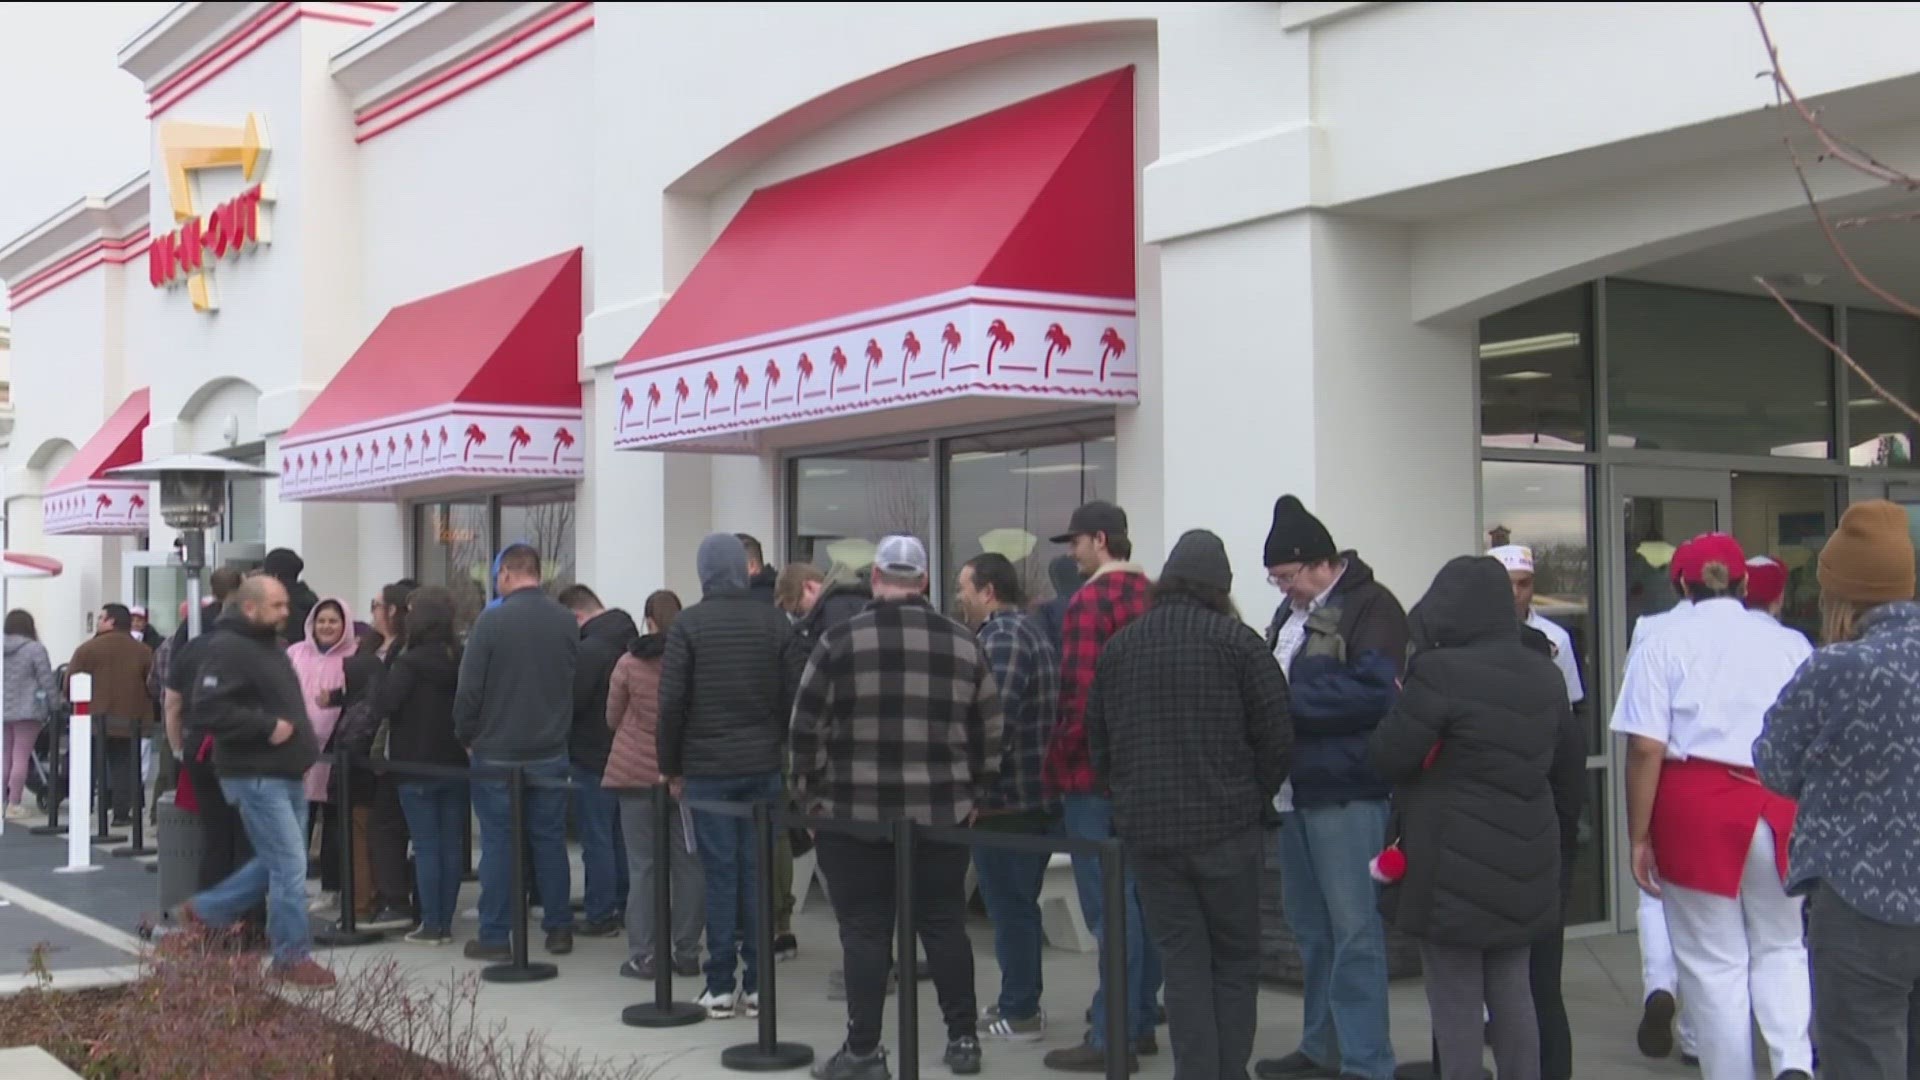 Idahoans came "In-N-Out" to get a taste of the franchise's first restaurant to open in the state.